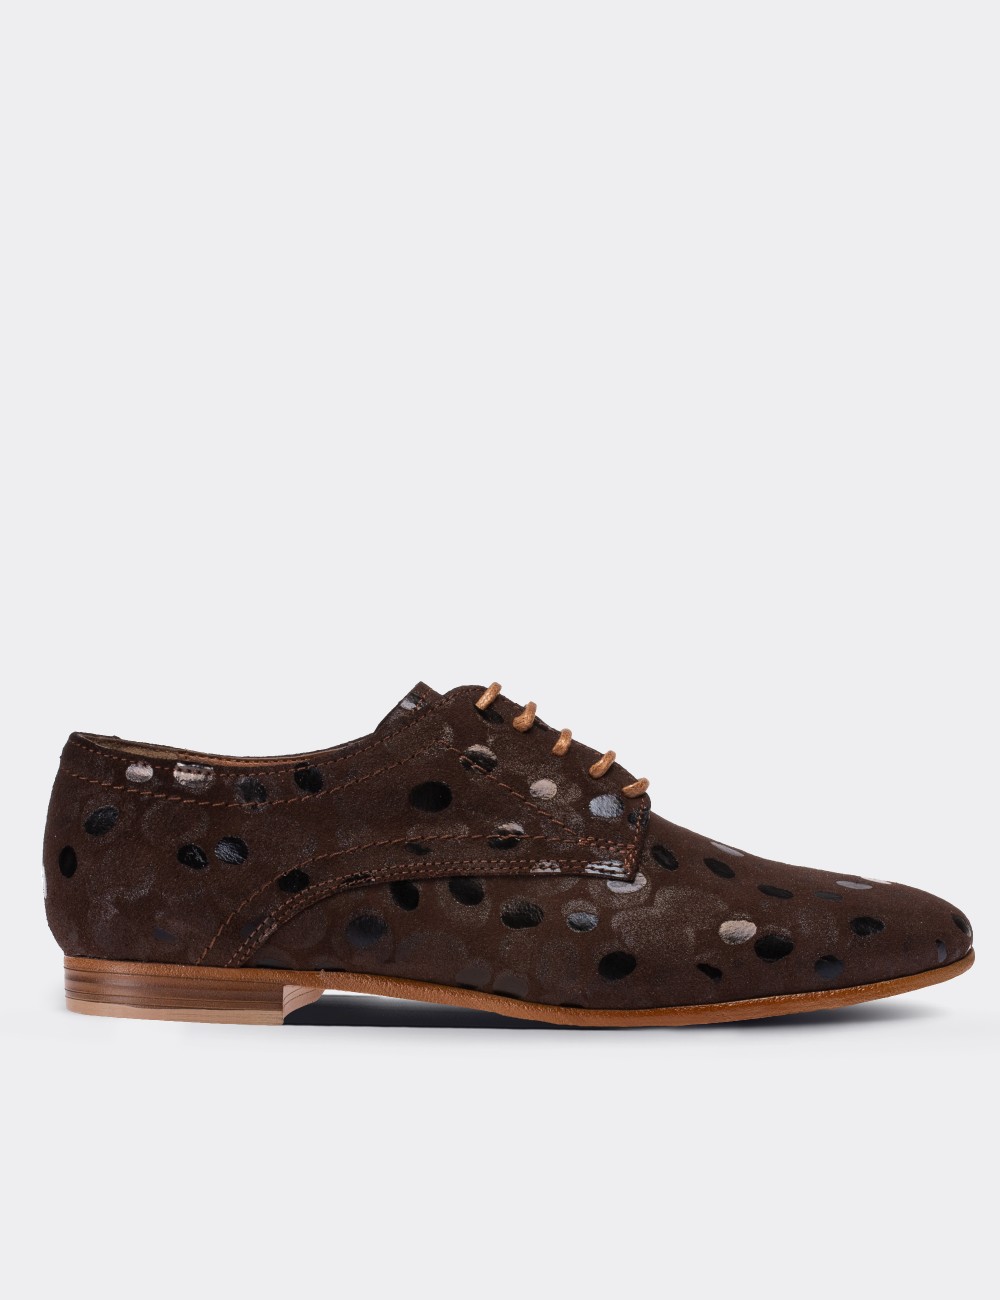 Brown Nubuck Leather Lace-up Shoes - 01430ZKHVC05